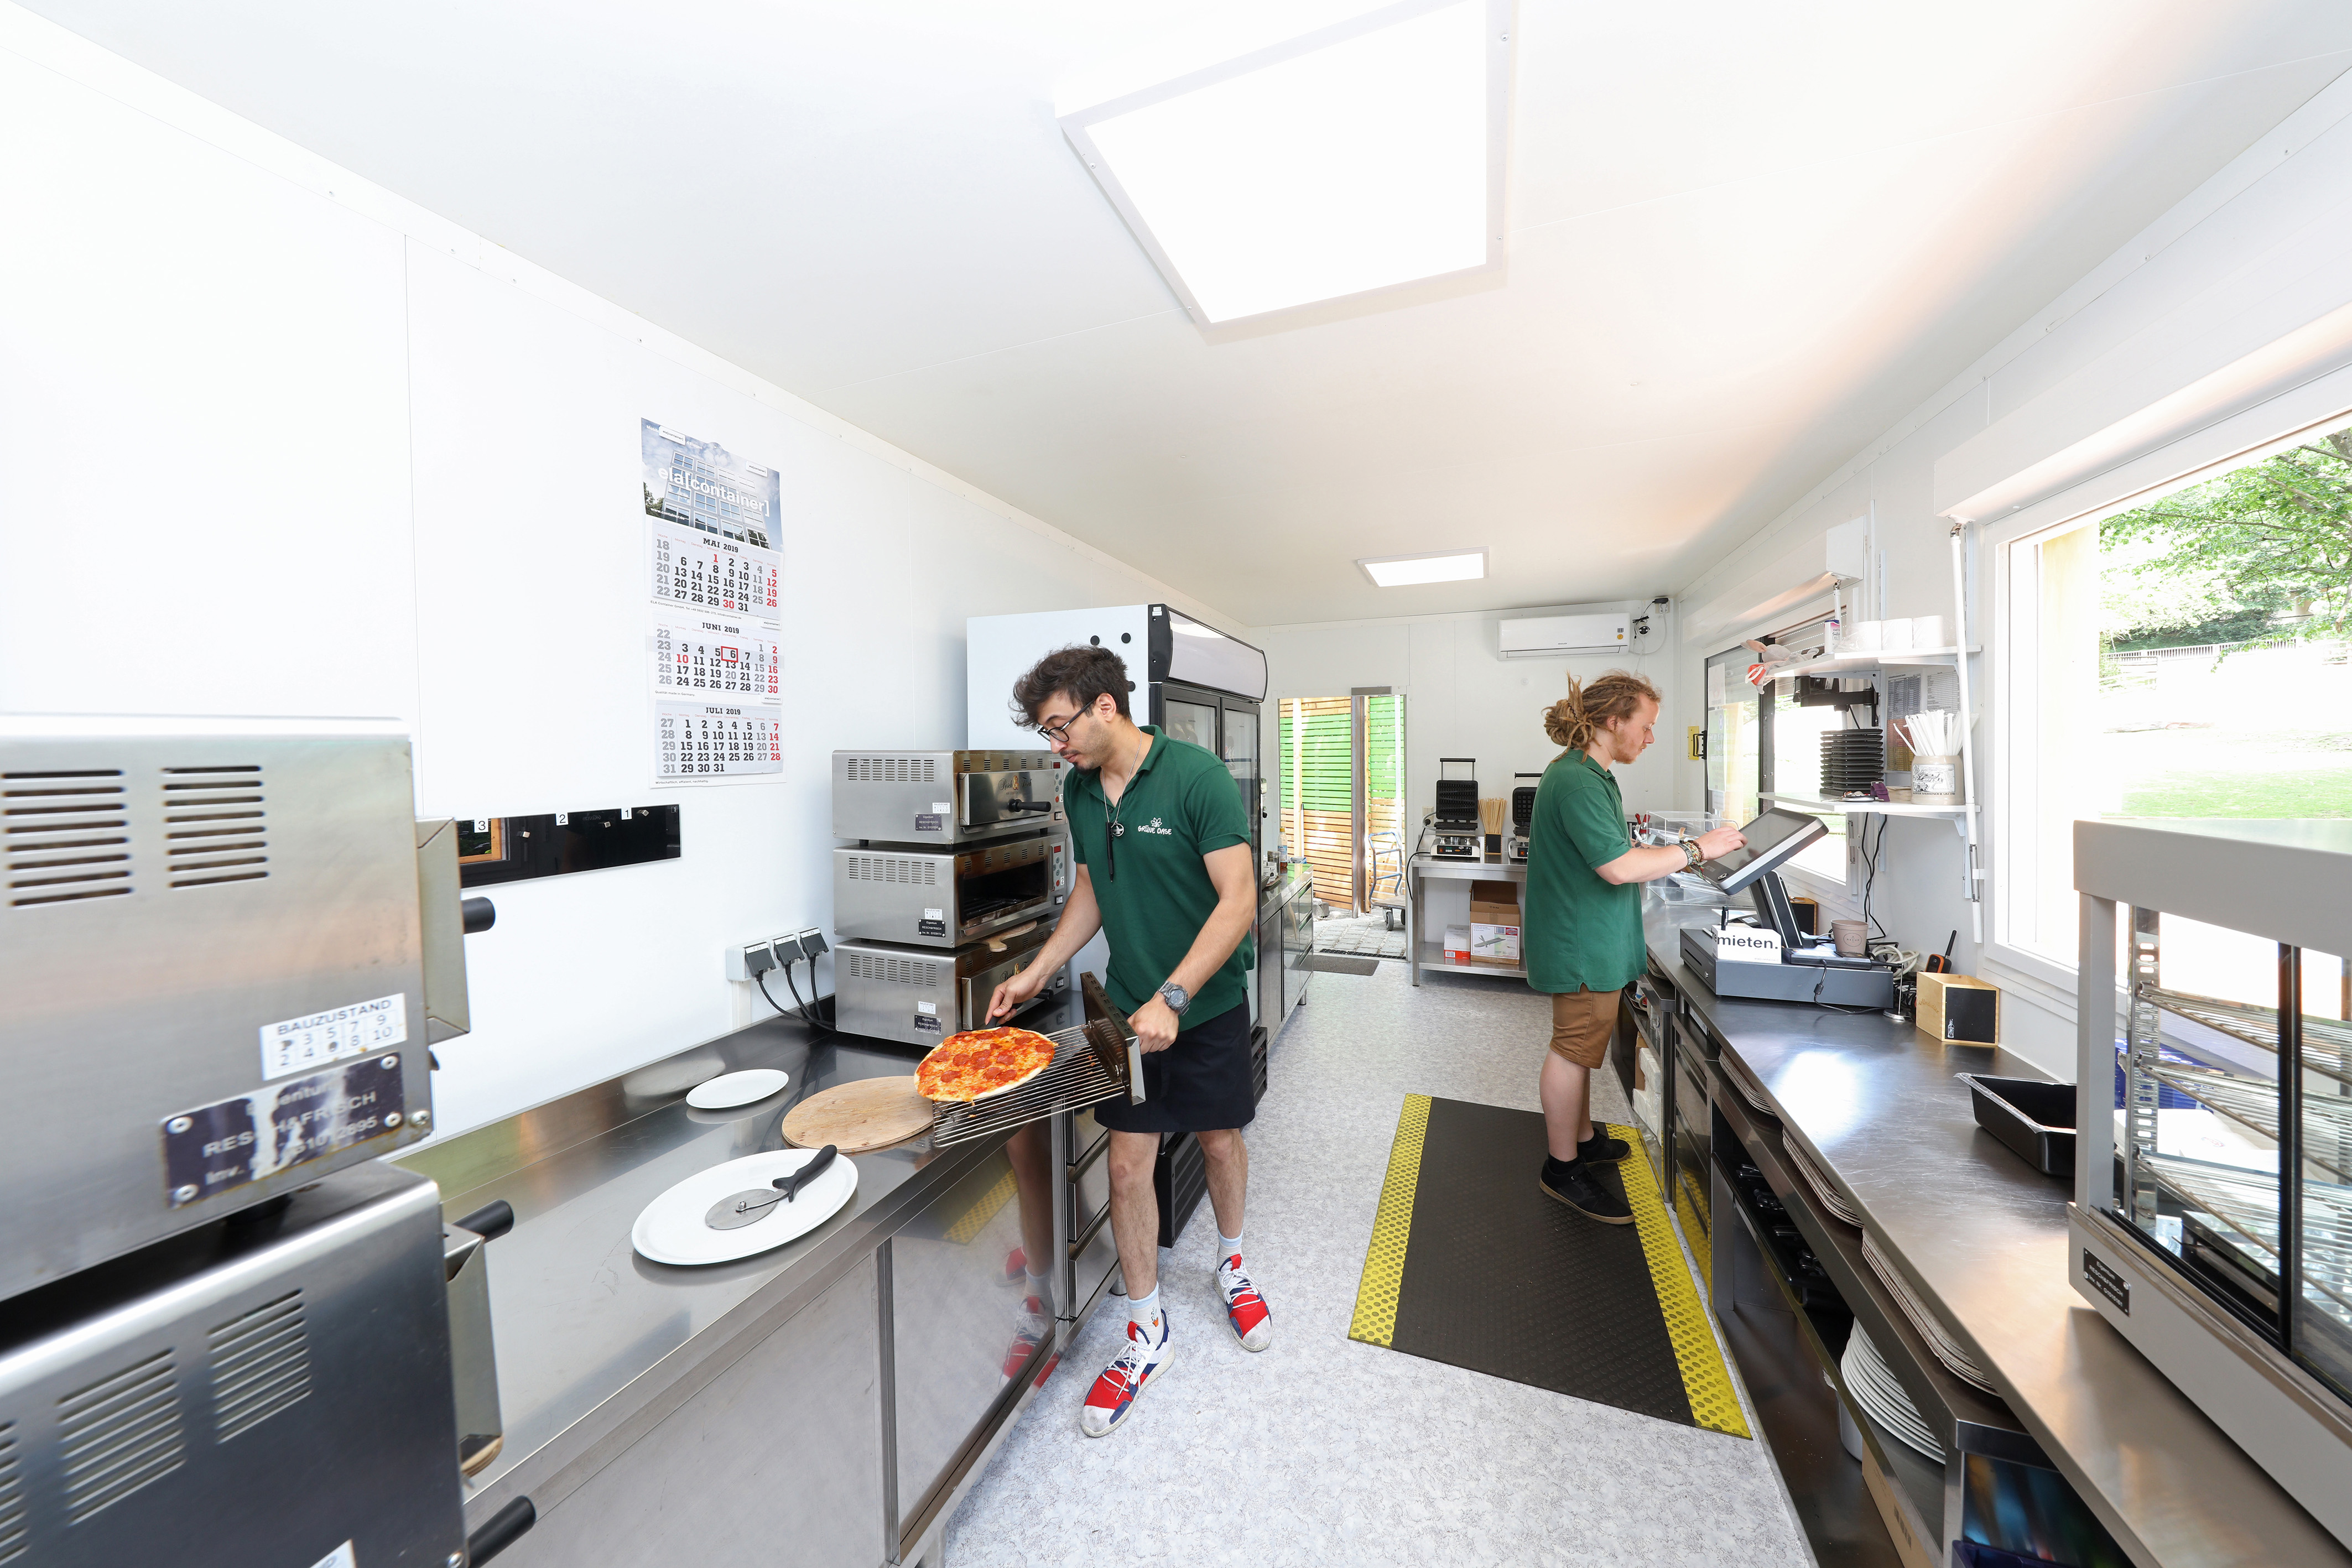 The space within the container system is optimally used for the kitchen.